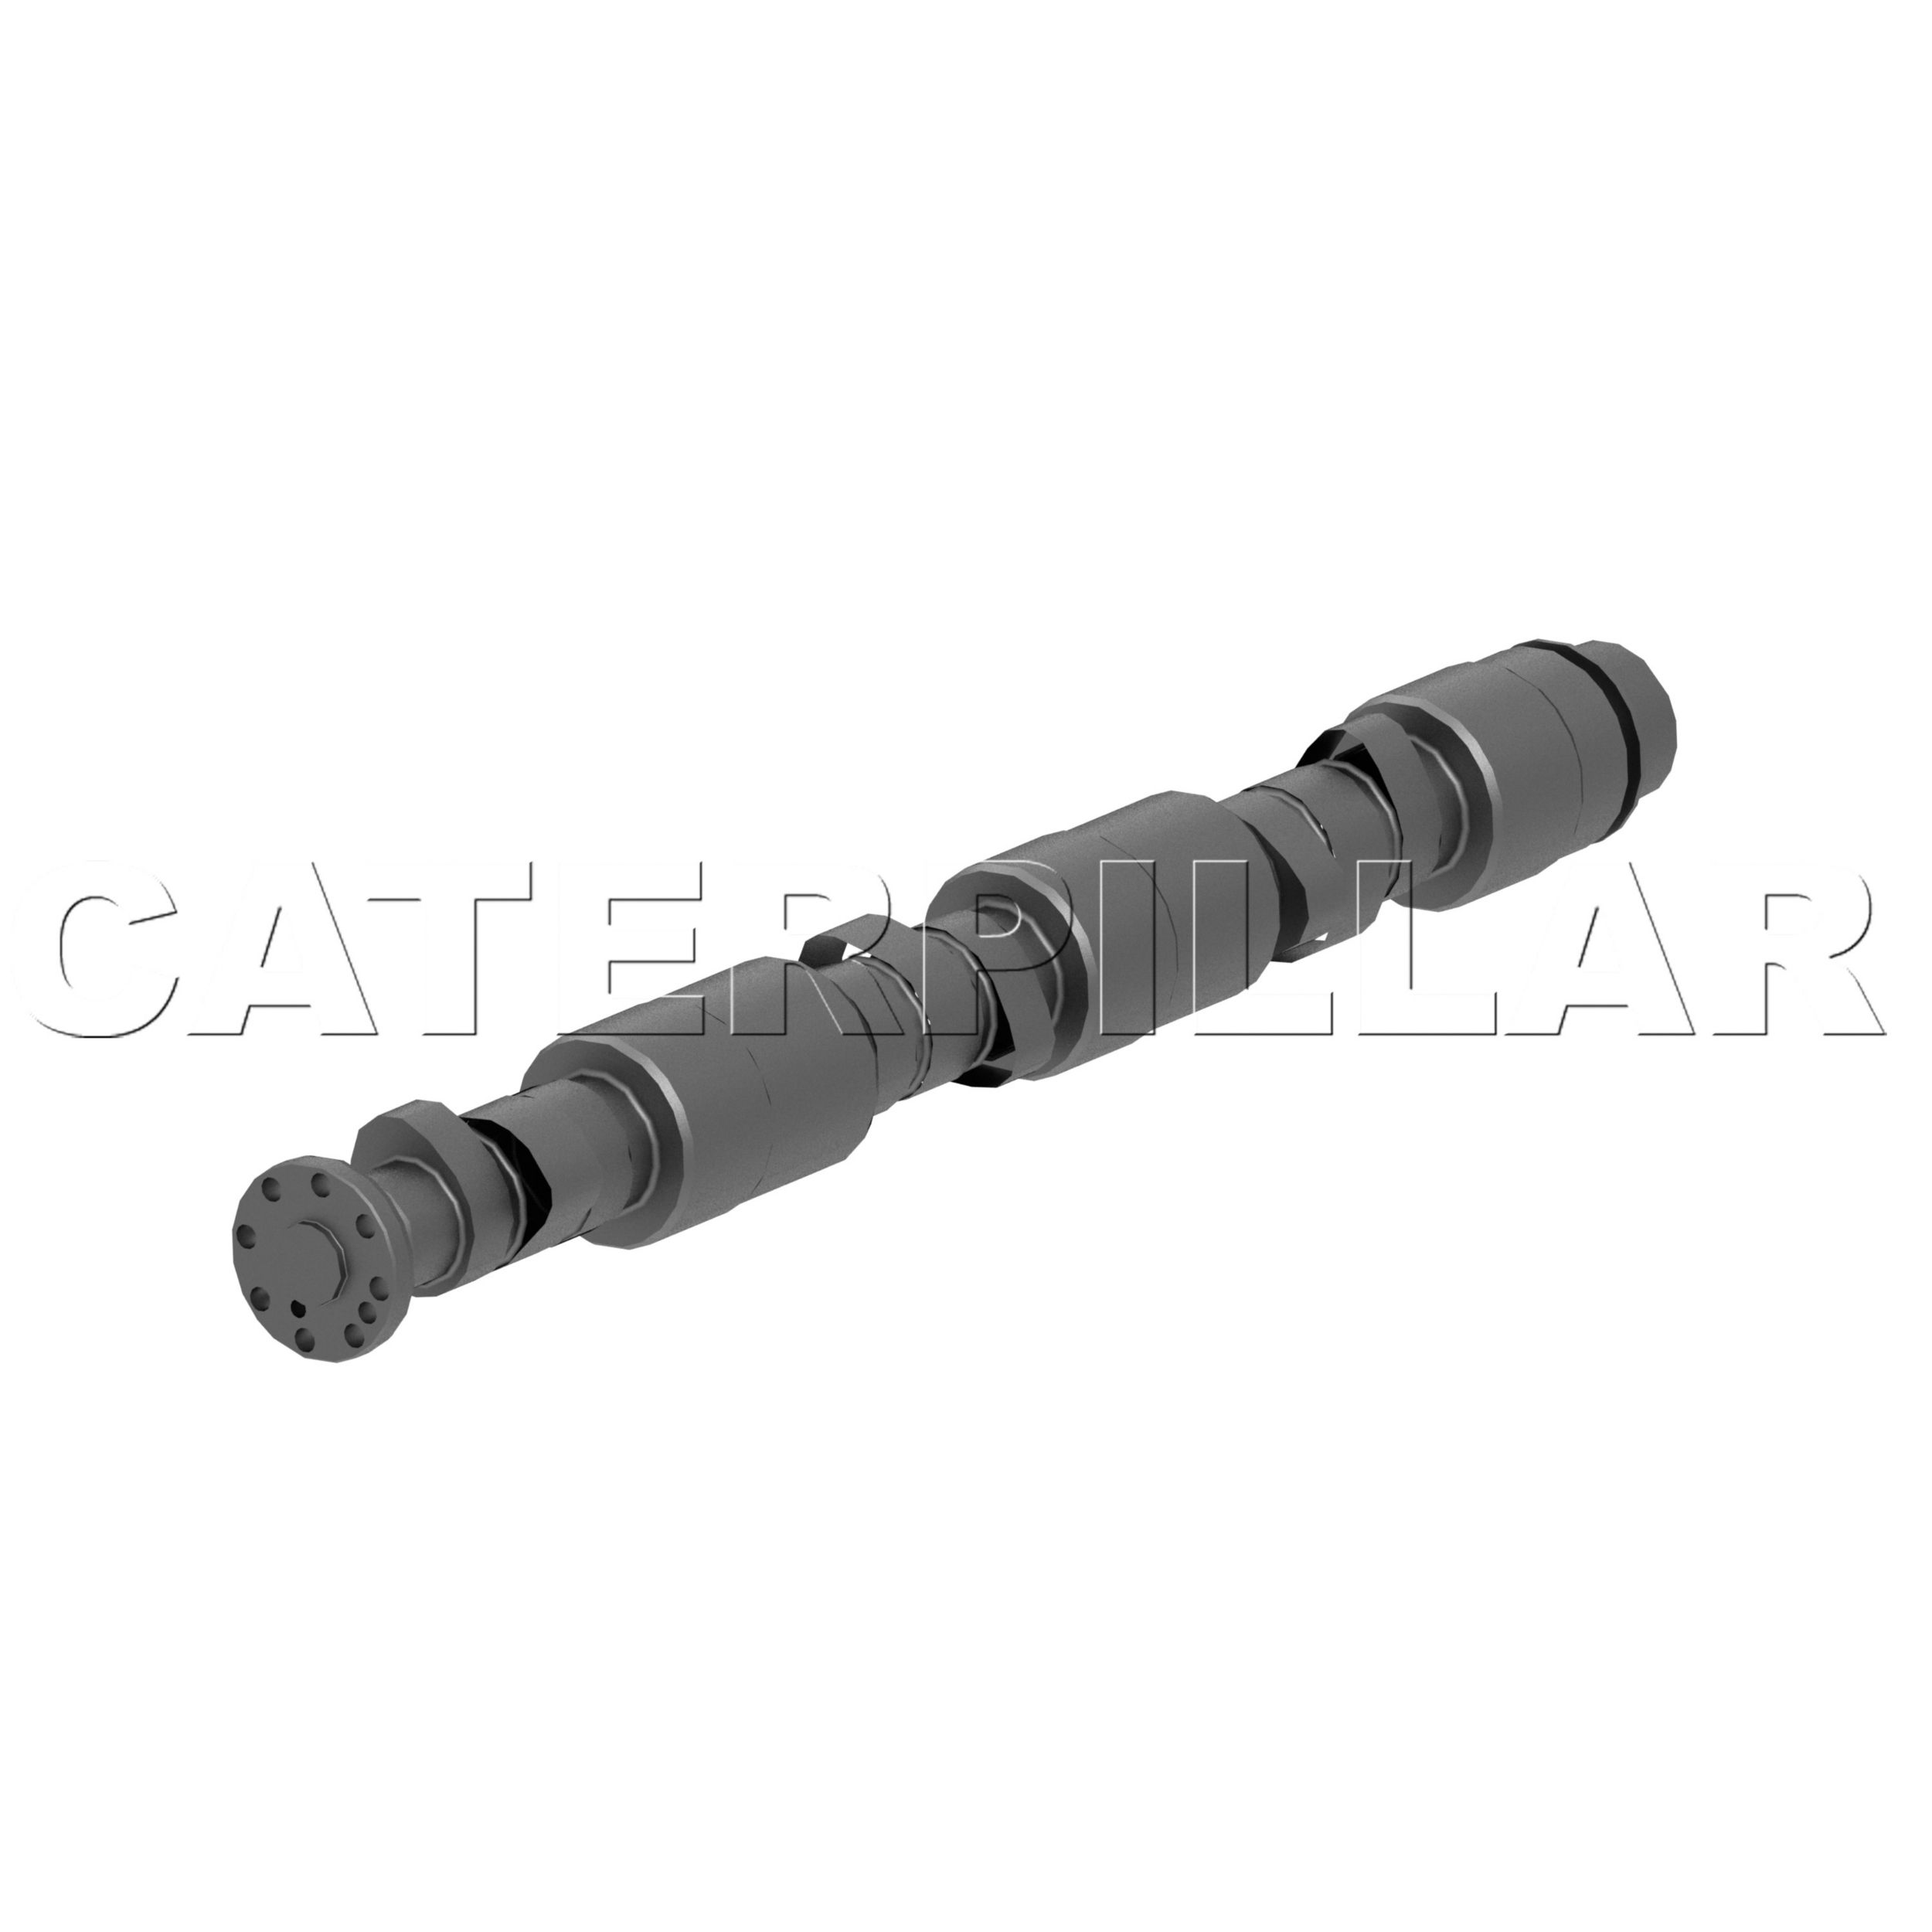 216-9782: Camshaft Assembly | Cat® Parts Store